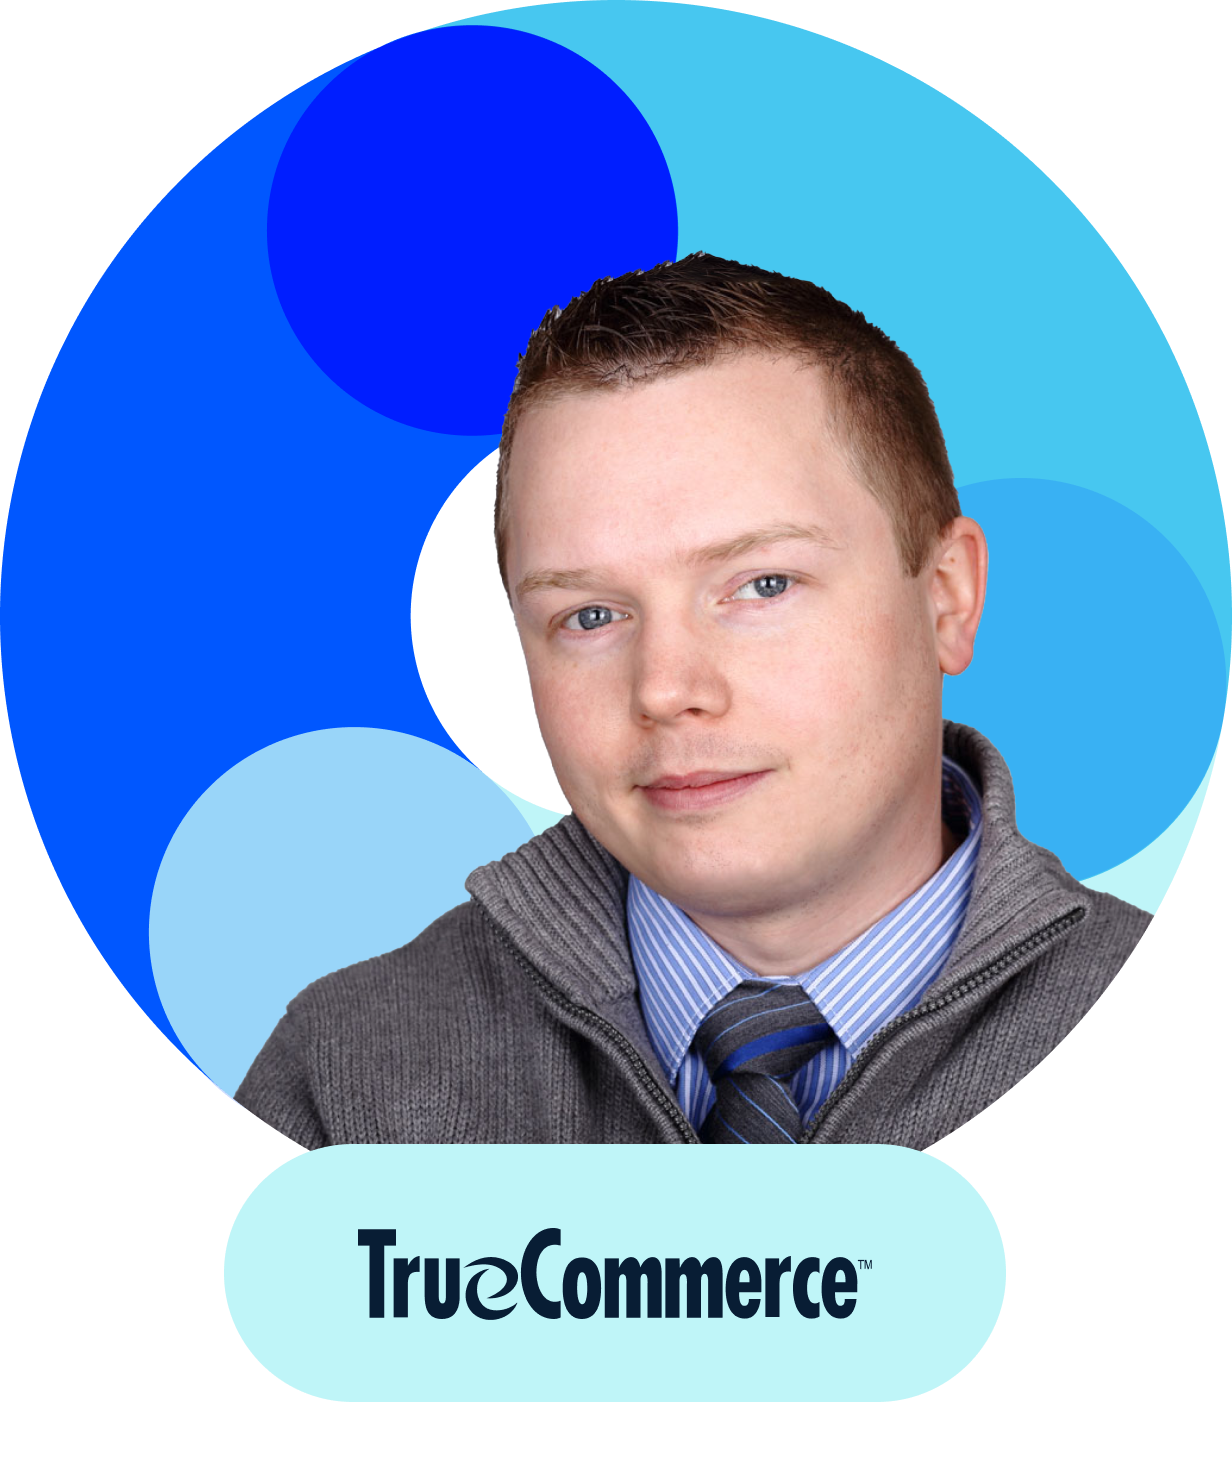 TrueCommerce reduced inbound conversation volume by 20% with proactive and self-serve support.